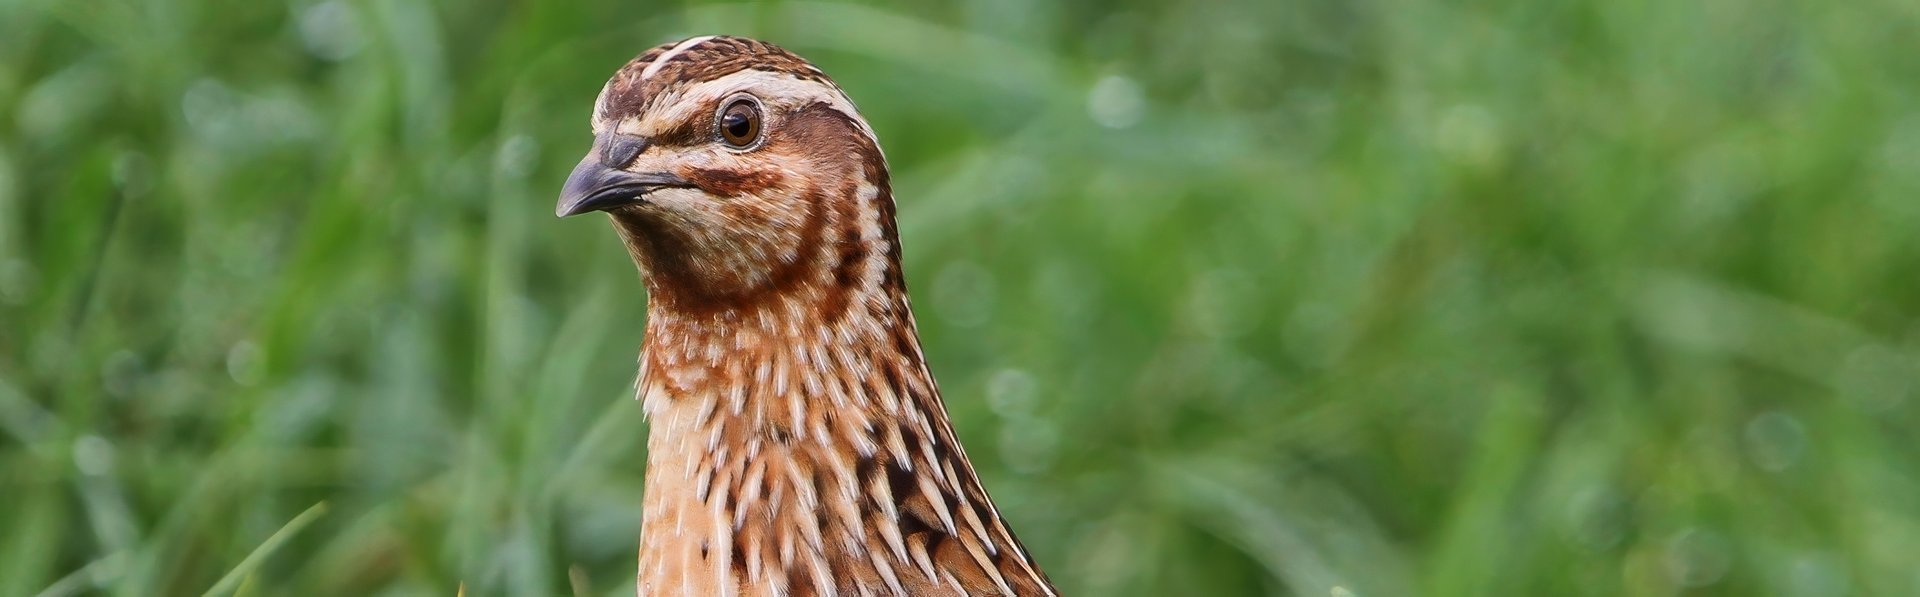 Quail (Coturnix coturnix). Photographer: Christoph Moning. Copyrighted. License: CC BY 4.0